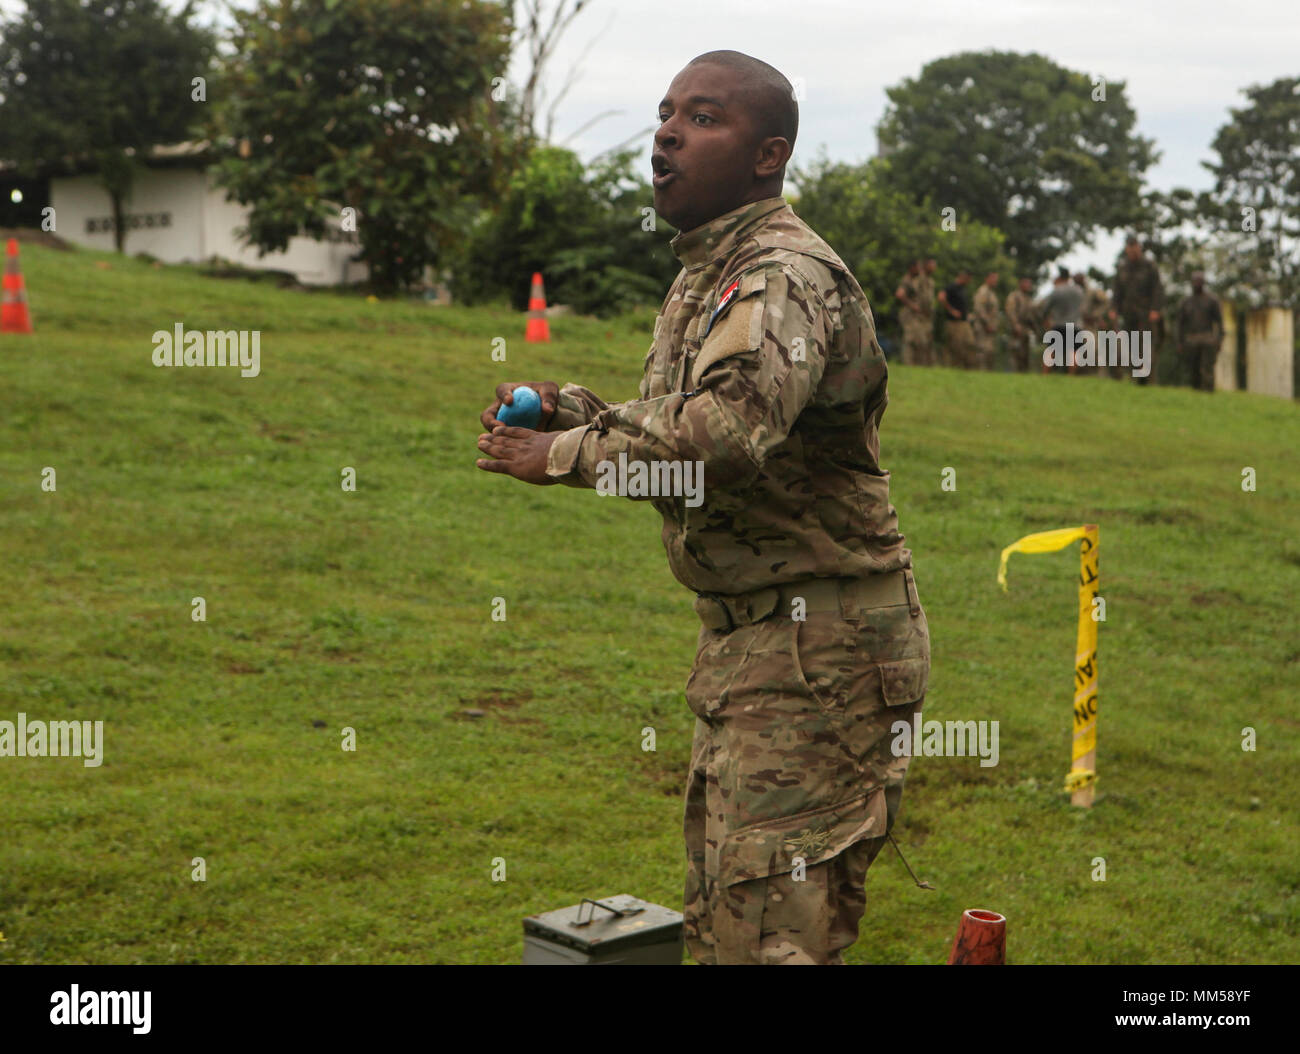 Panamanian Servicio Nacional Aeronaval Cpl. Edwin J. Lasso  prepares to throw a simulation grenade during a combat fitness test conducted by U.S. Marines with  Mobile Training Team One, Command Element, Special Purpose Marine Air-Ground Task Force - Southern Command, at Agustin Santos Vinda Base in Quebrada de Piedra, Panama, Aug. 29, 2017. The MTT conducted a three-week course with Panamanian service members consisting of basic infantry tactics, marksmanship, and patrolling. The Marines and sailors of SPMAGTF-SC are deployed to Central America to conduct security cooperation training and engi Stock Photo